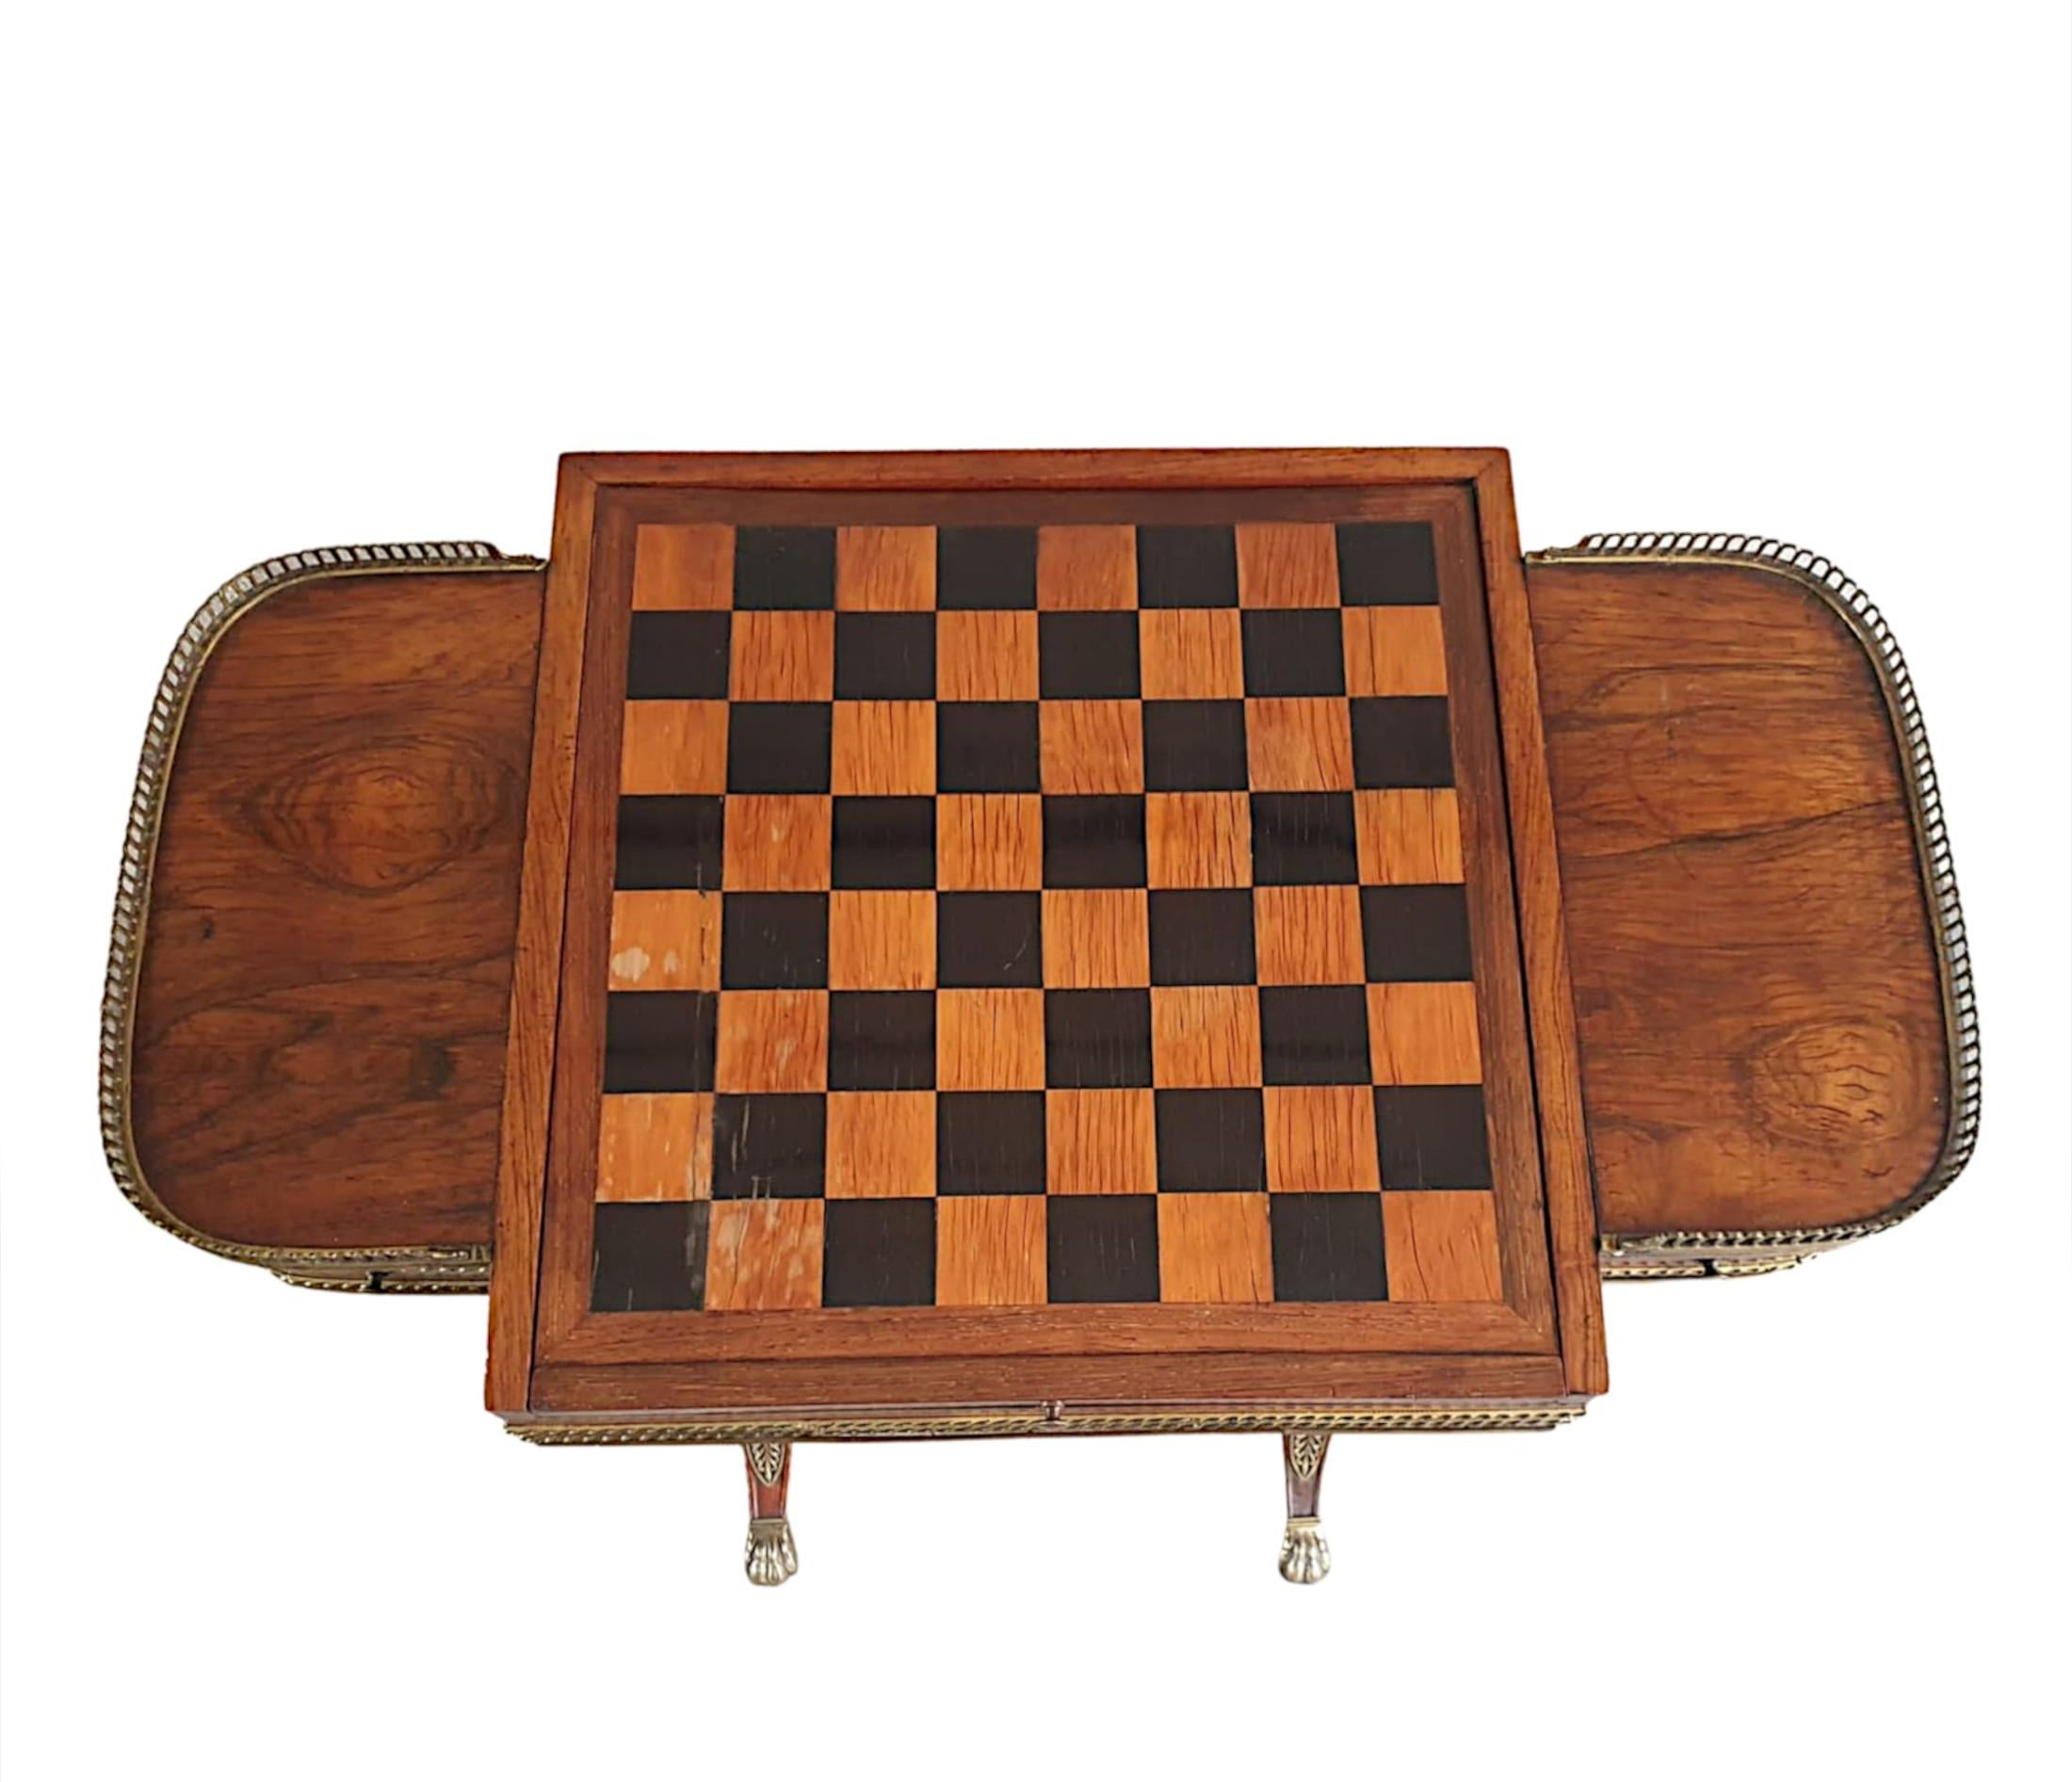 English Rare Early 19th Century Regency Combination Games or Work Table For Sale